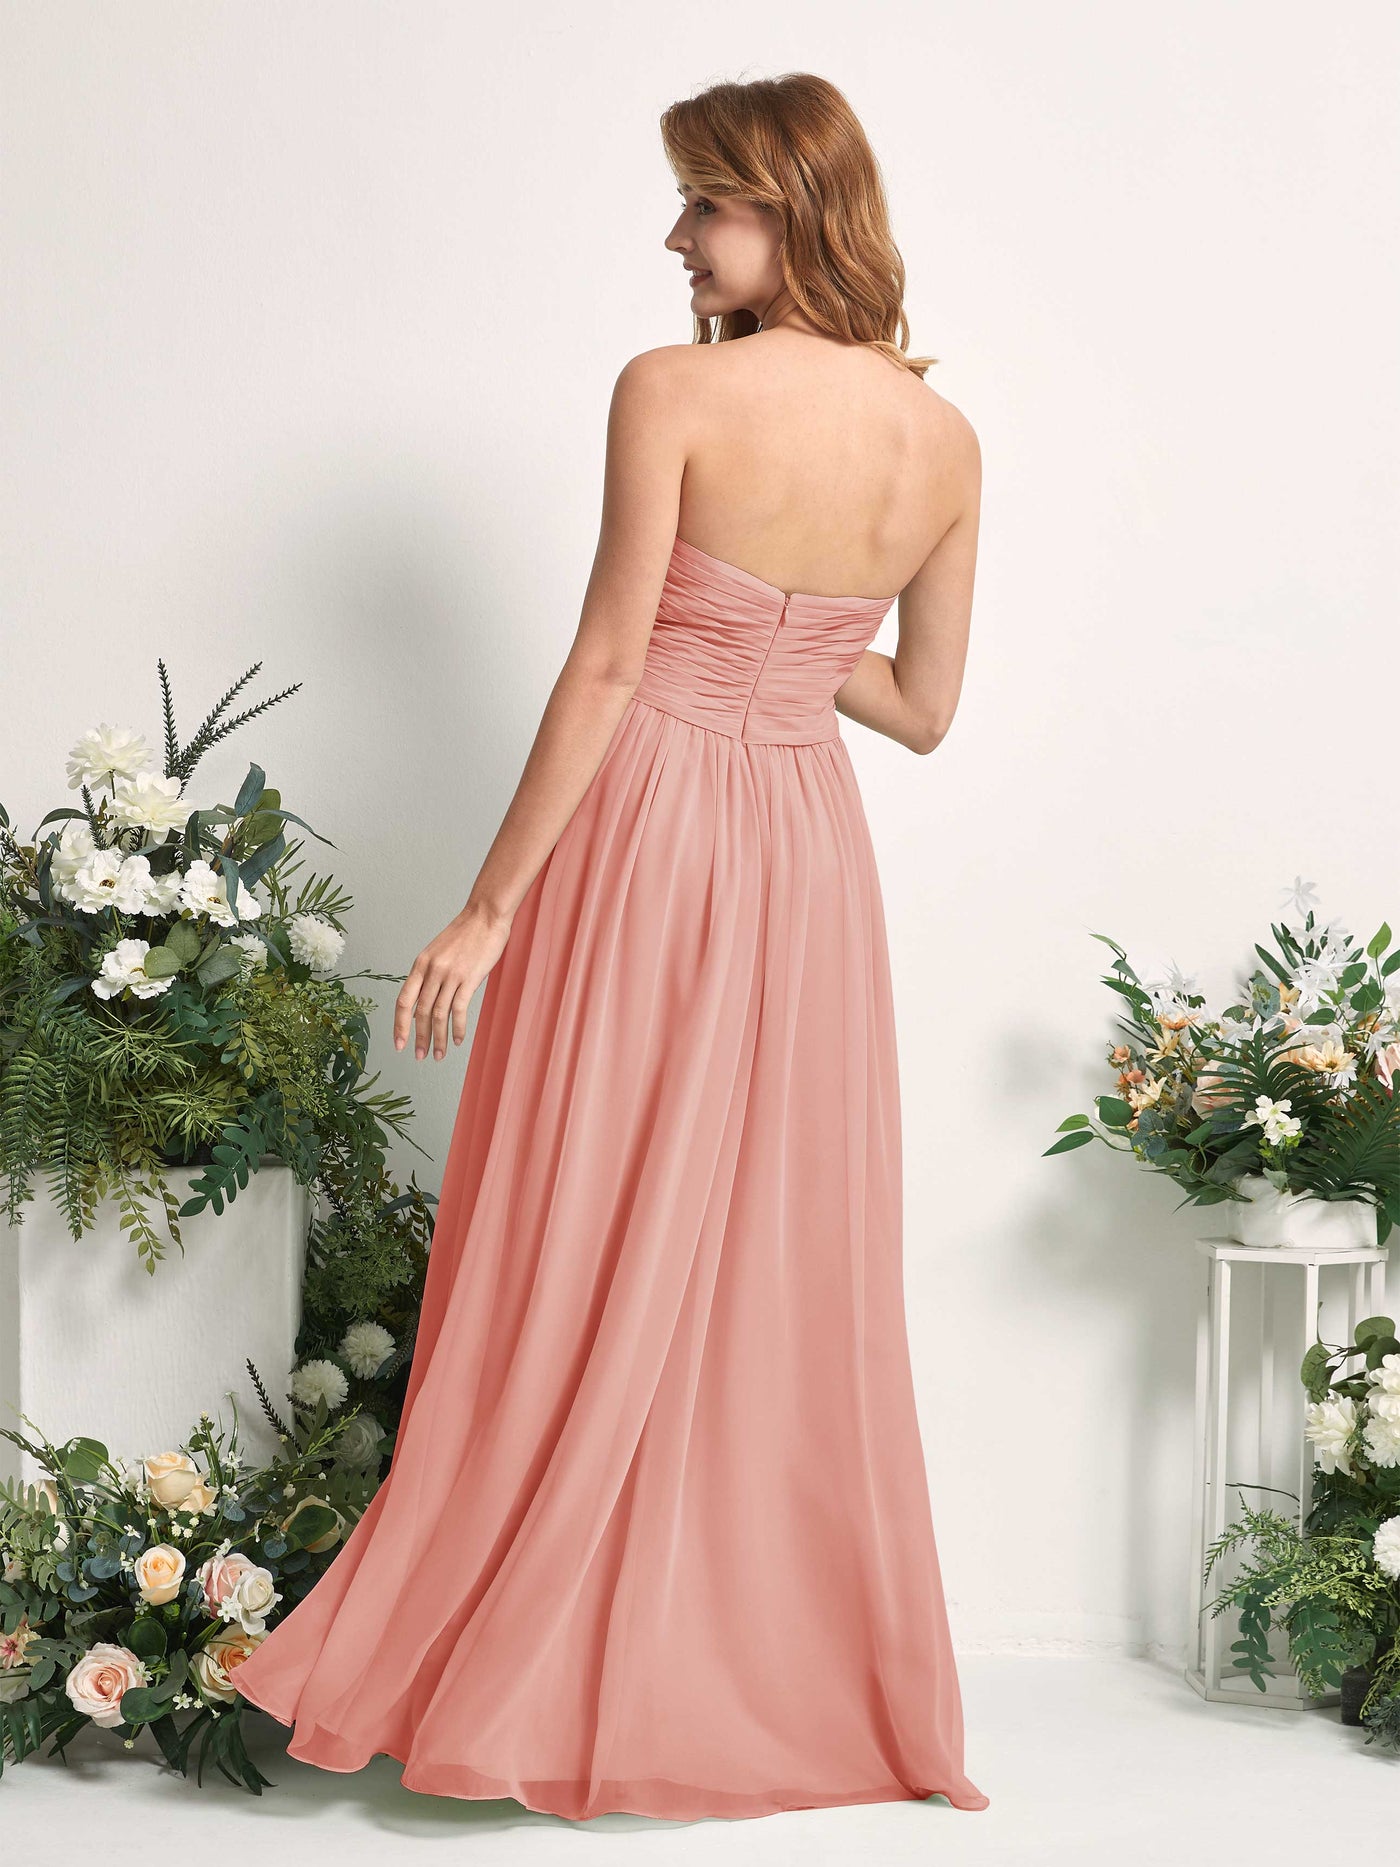 Bridesmaid Dress A-line Chiffon Sweetheart Full Length Sleeveless Wedding Party Dress - Champagne Rose (81226906)#color_champagne-rose